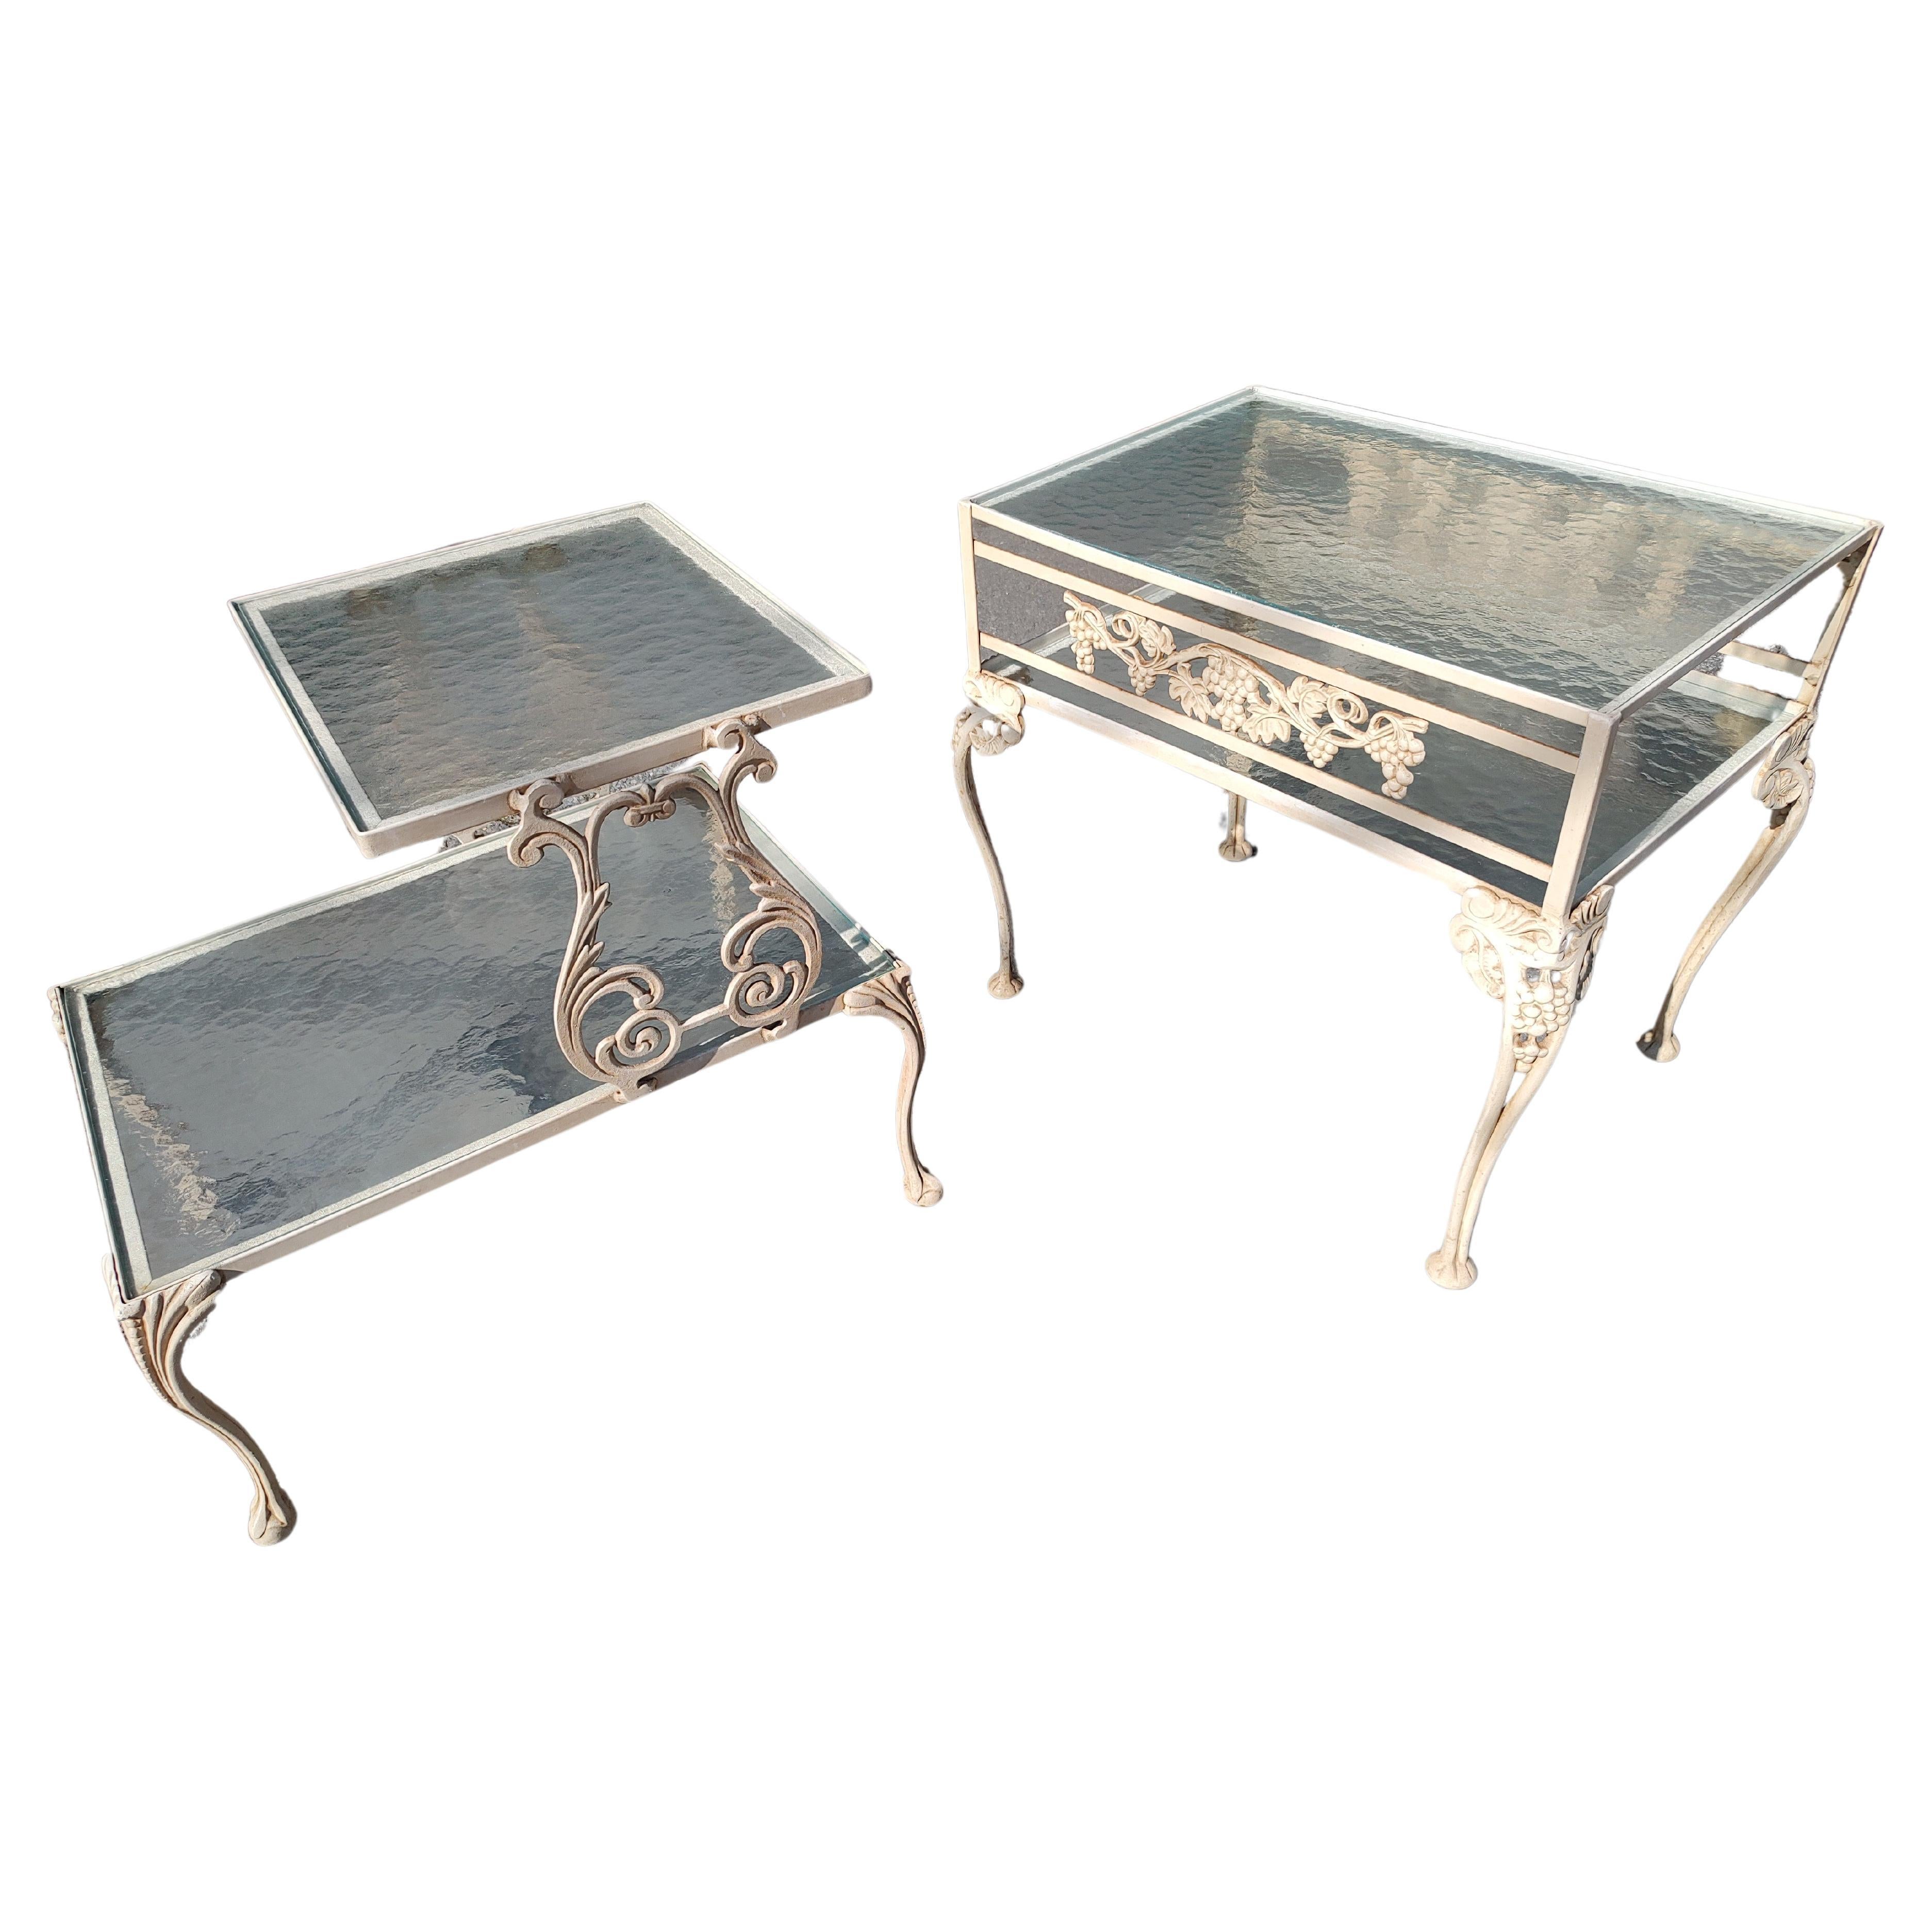 Pair of Cast Aluminum End Tables by Molla of Italy Obscure Glass Tops with Shelf For Sale